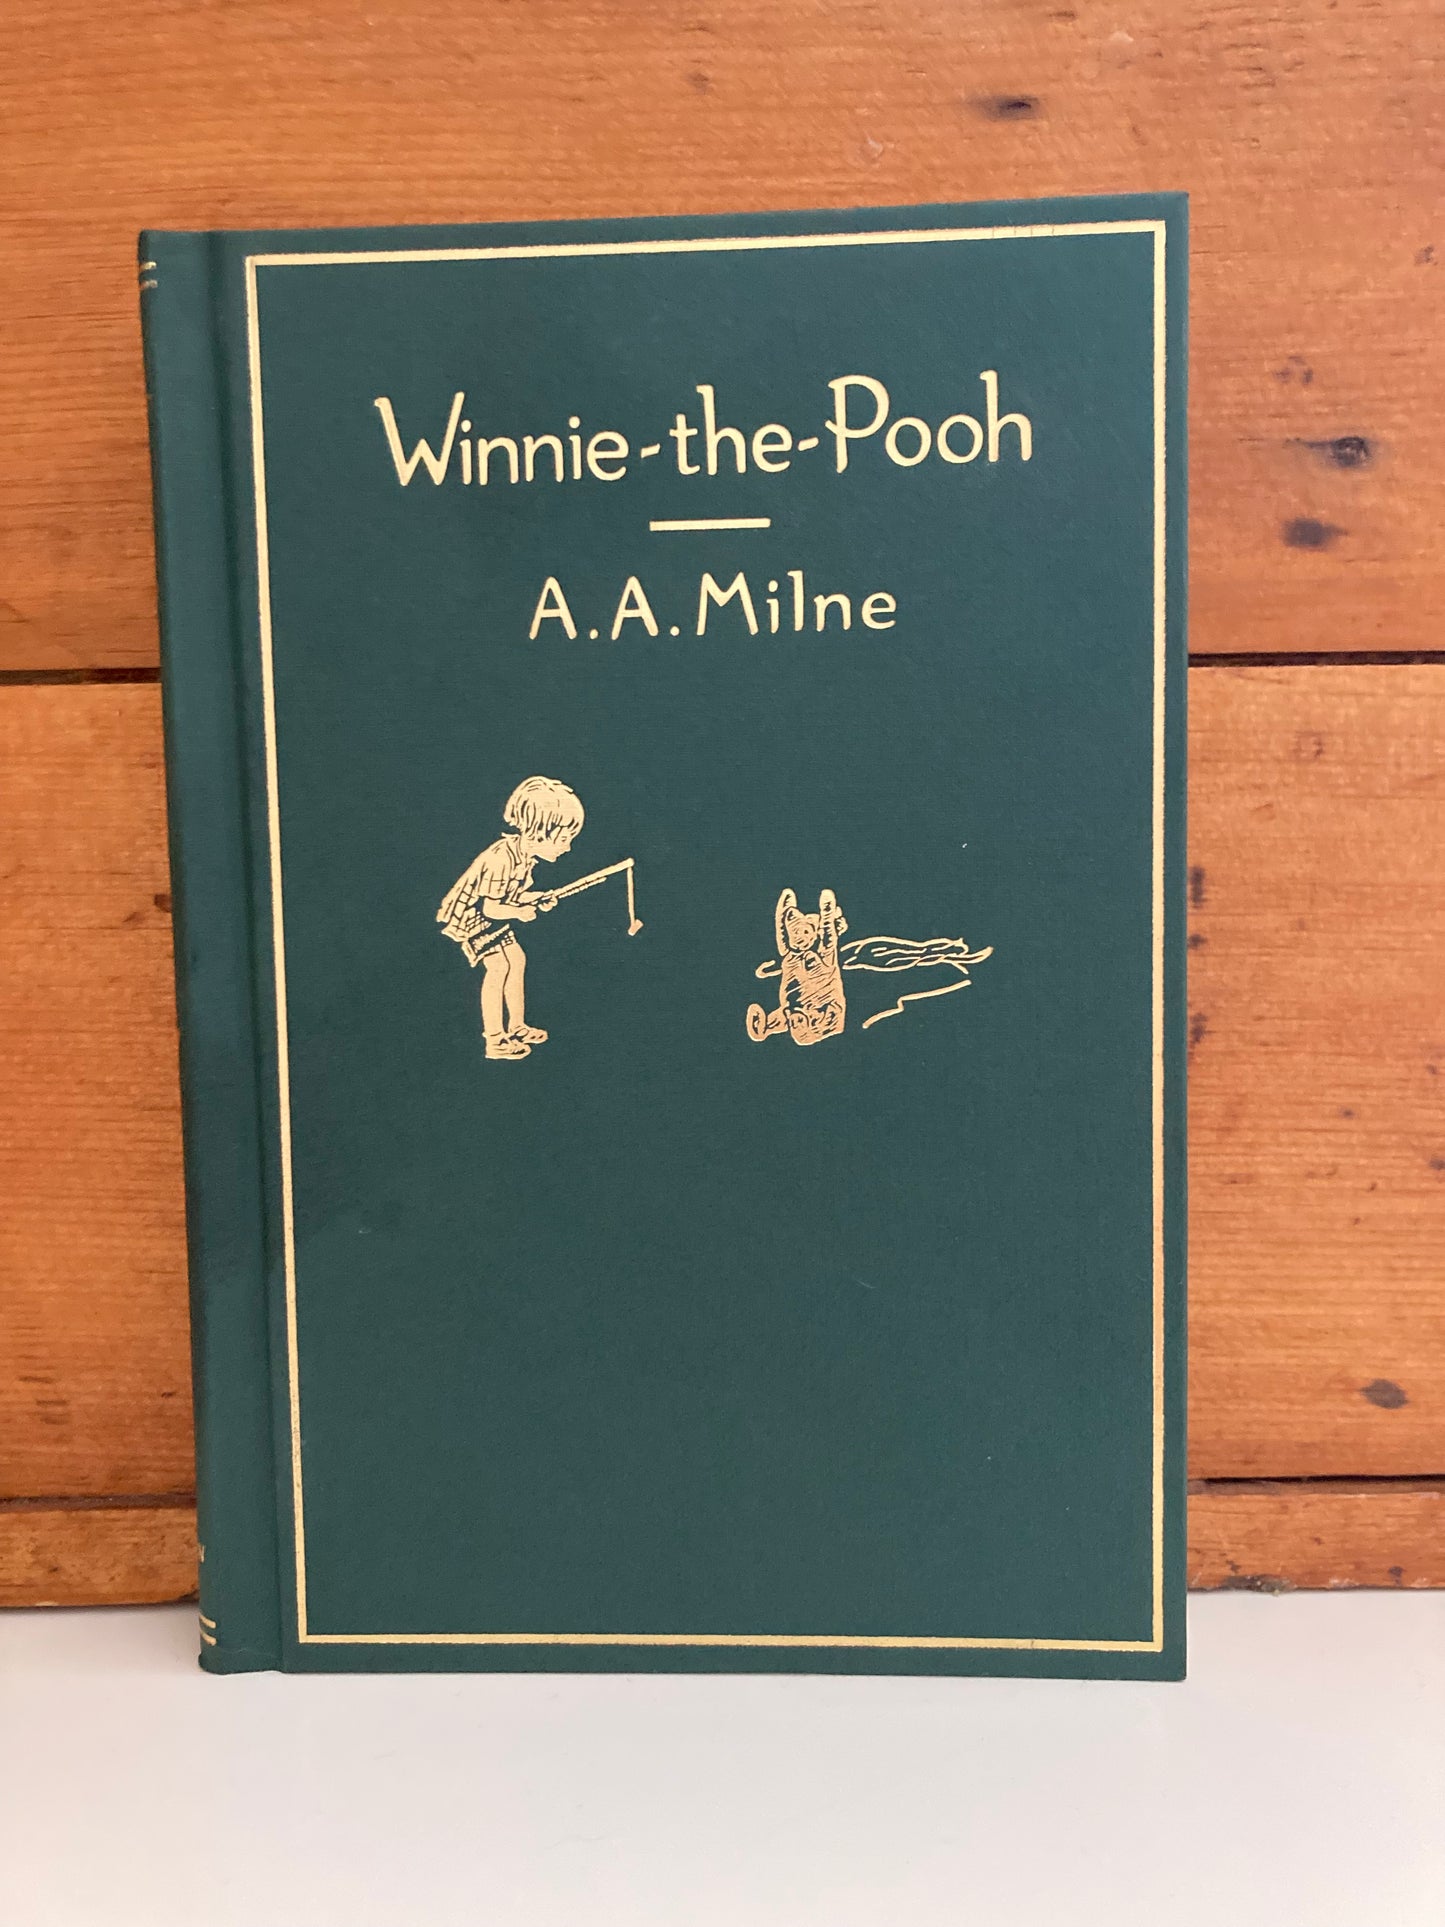 Chapter Book for Young Readers - WINNIE-THE-POOH COLLECTION, 4 Titles to choose from!